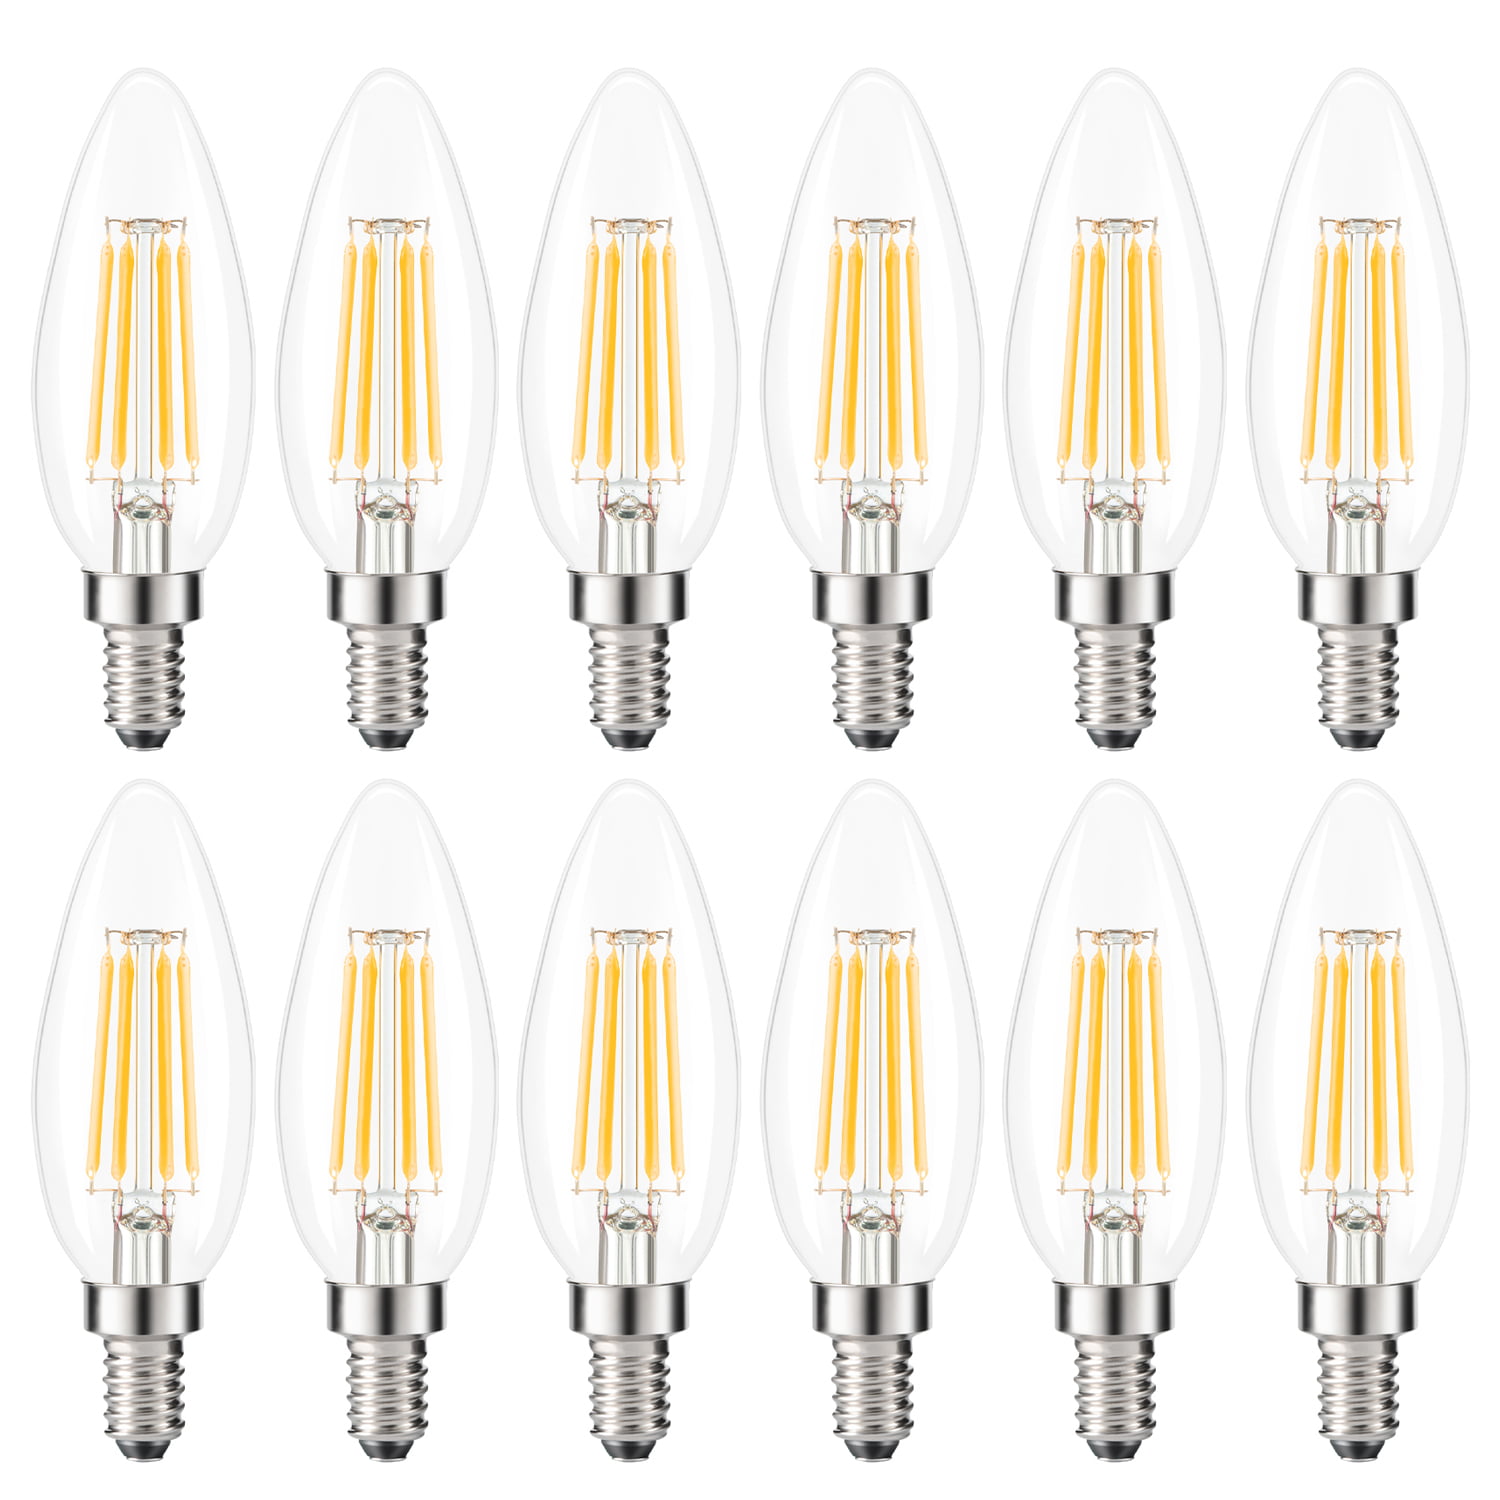 Enclosed Fixture Rated Dimmable E12 12x MaxLite LED Chandelier Bulbs 4W 40W 